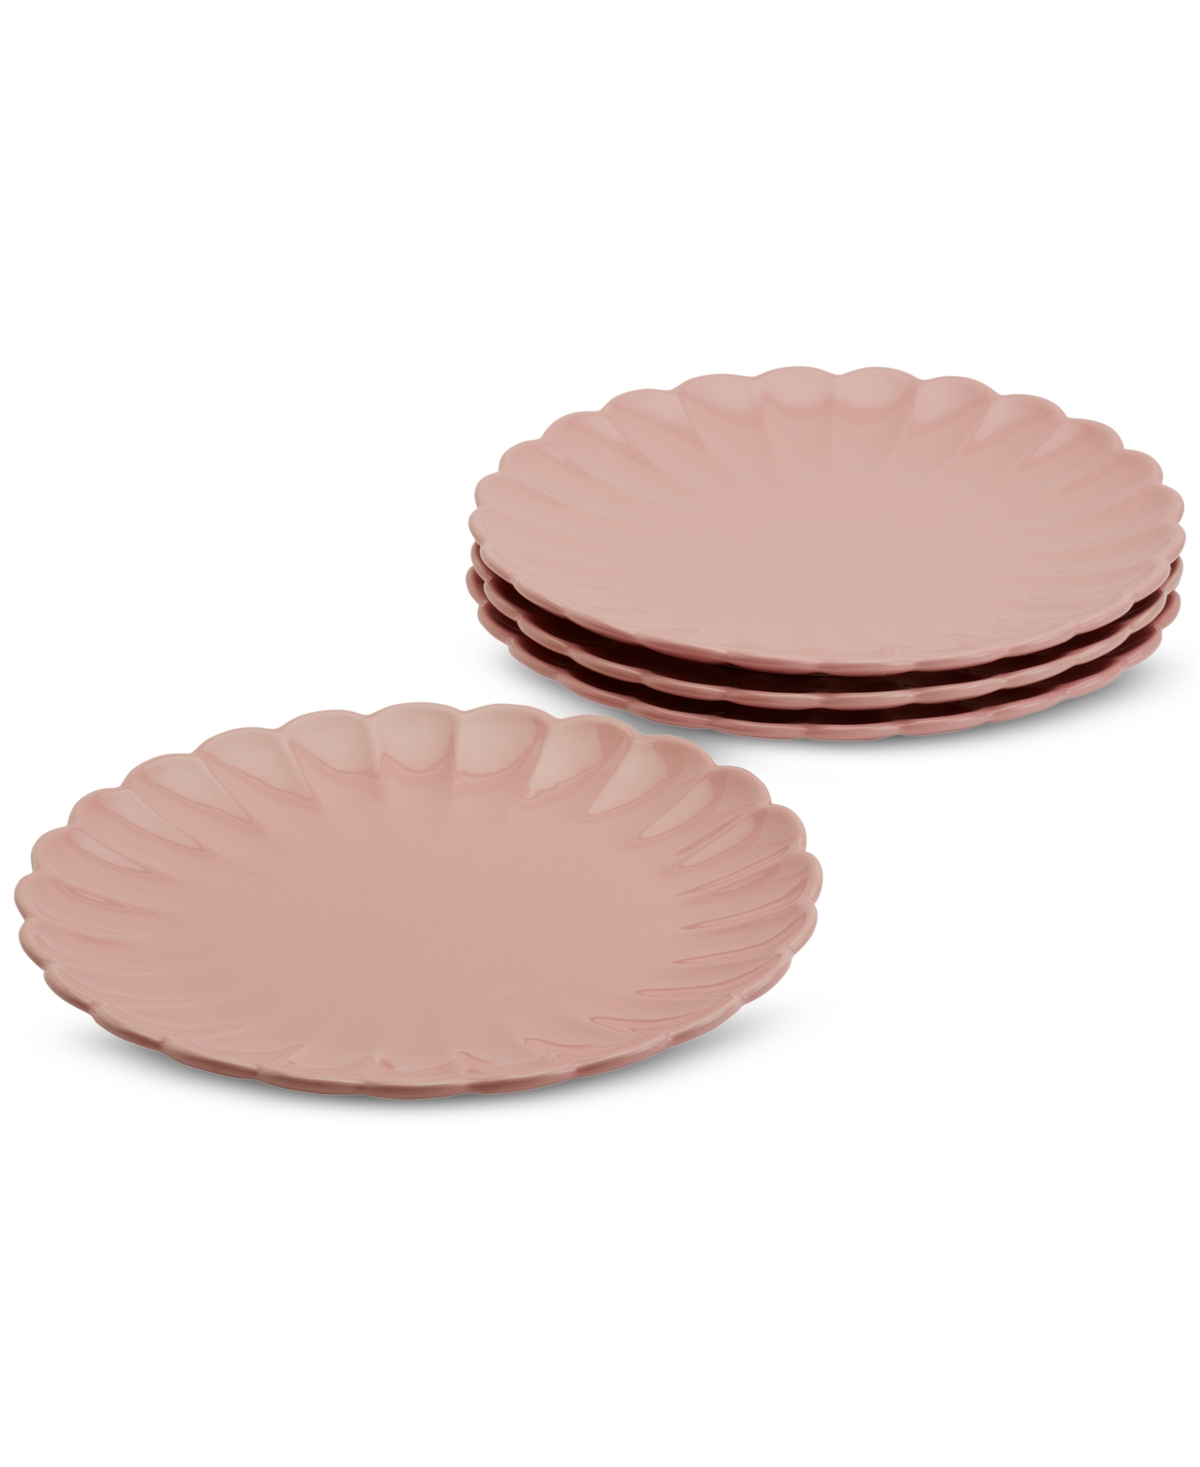 Pink Scalloped Dinner Plates, Set of 4 - Pink